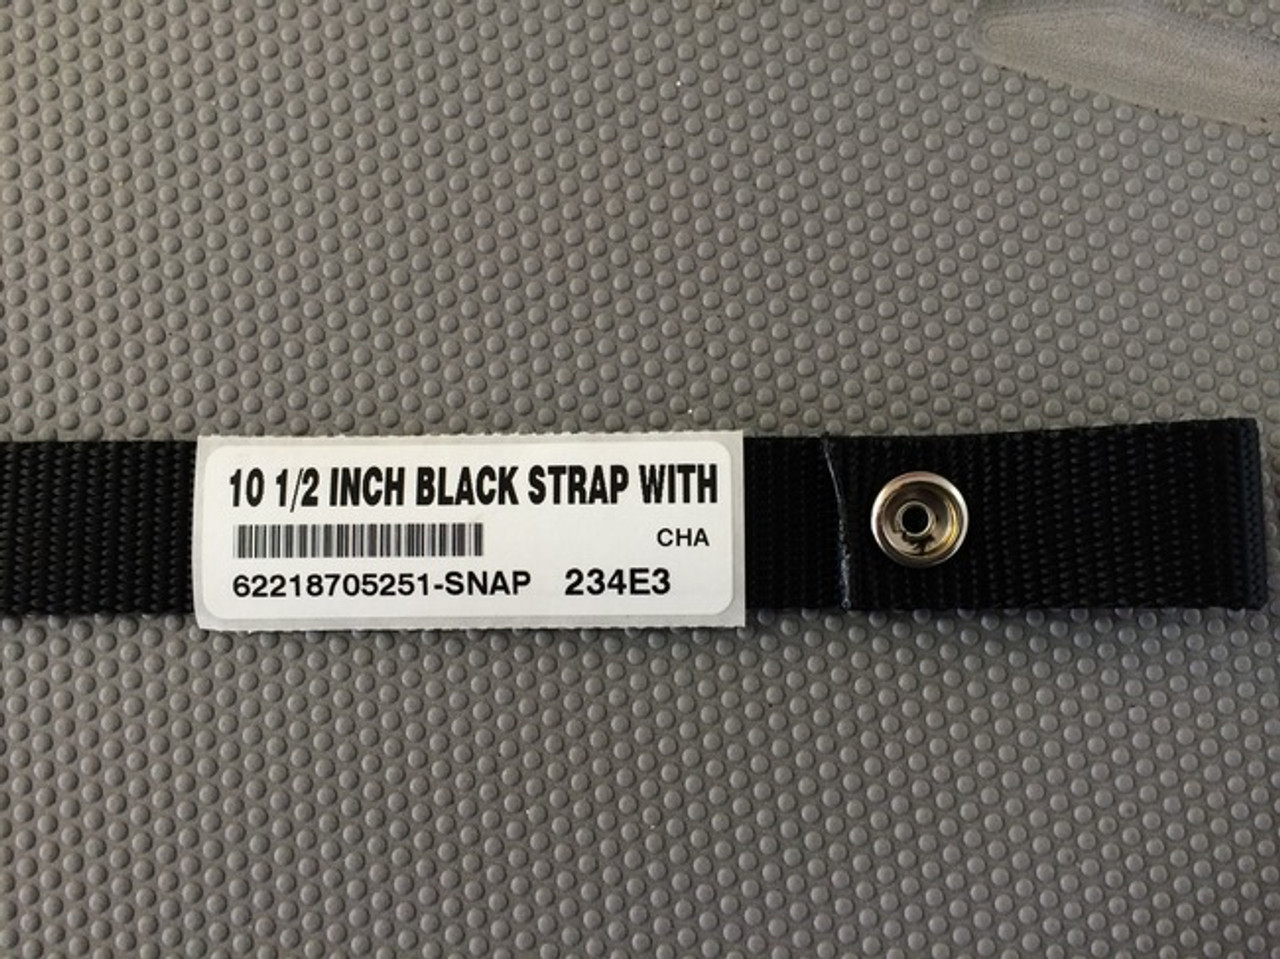 10 1/2 INCH BLACK STRAP WITH SNAP